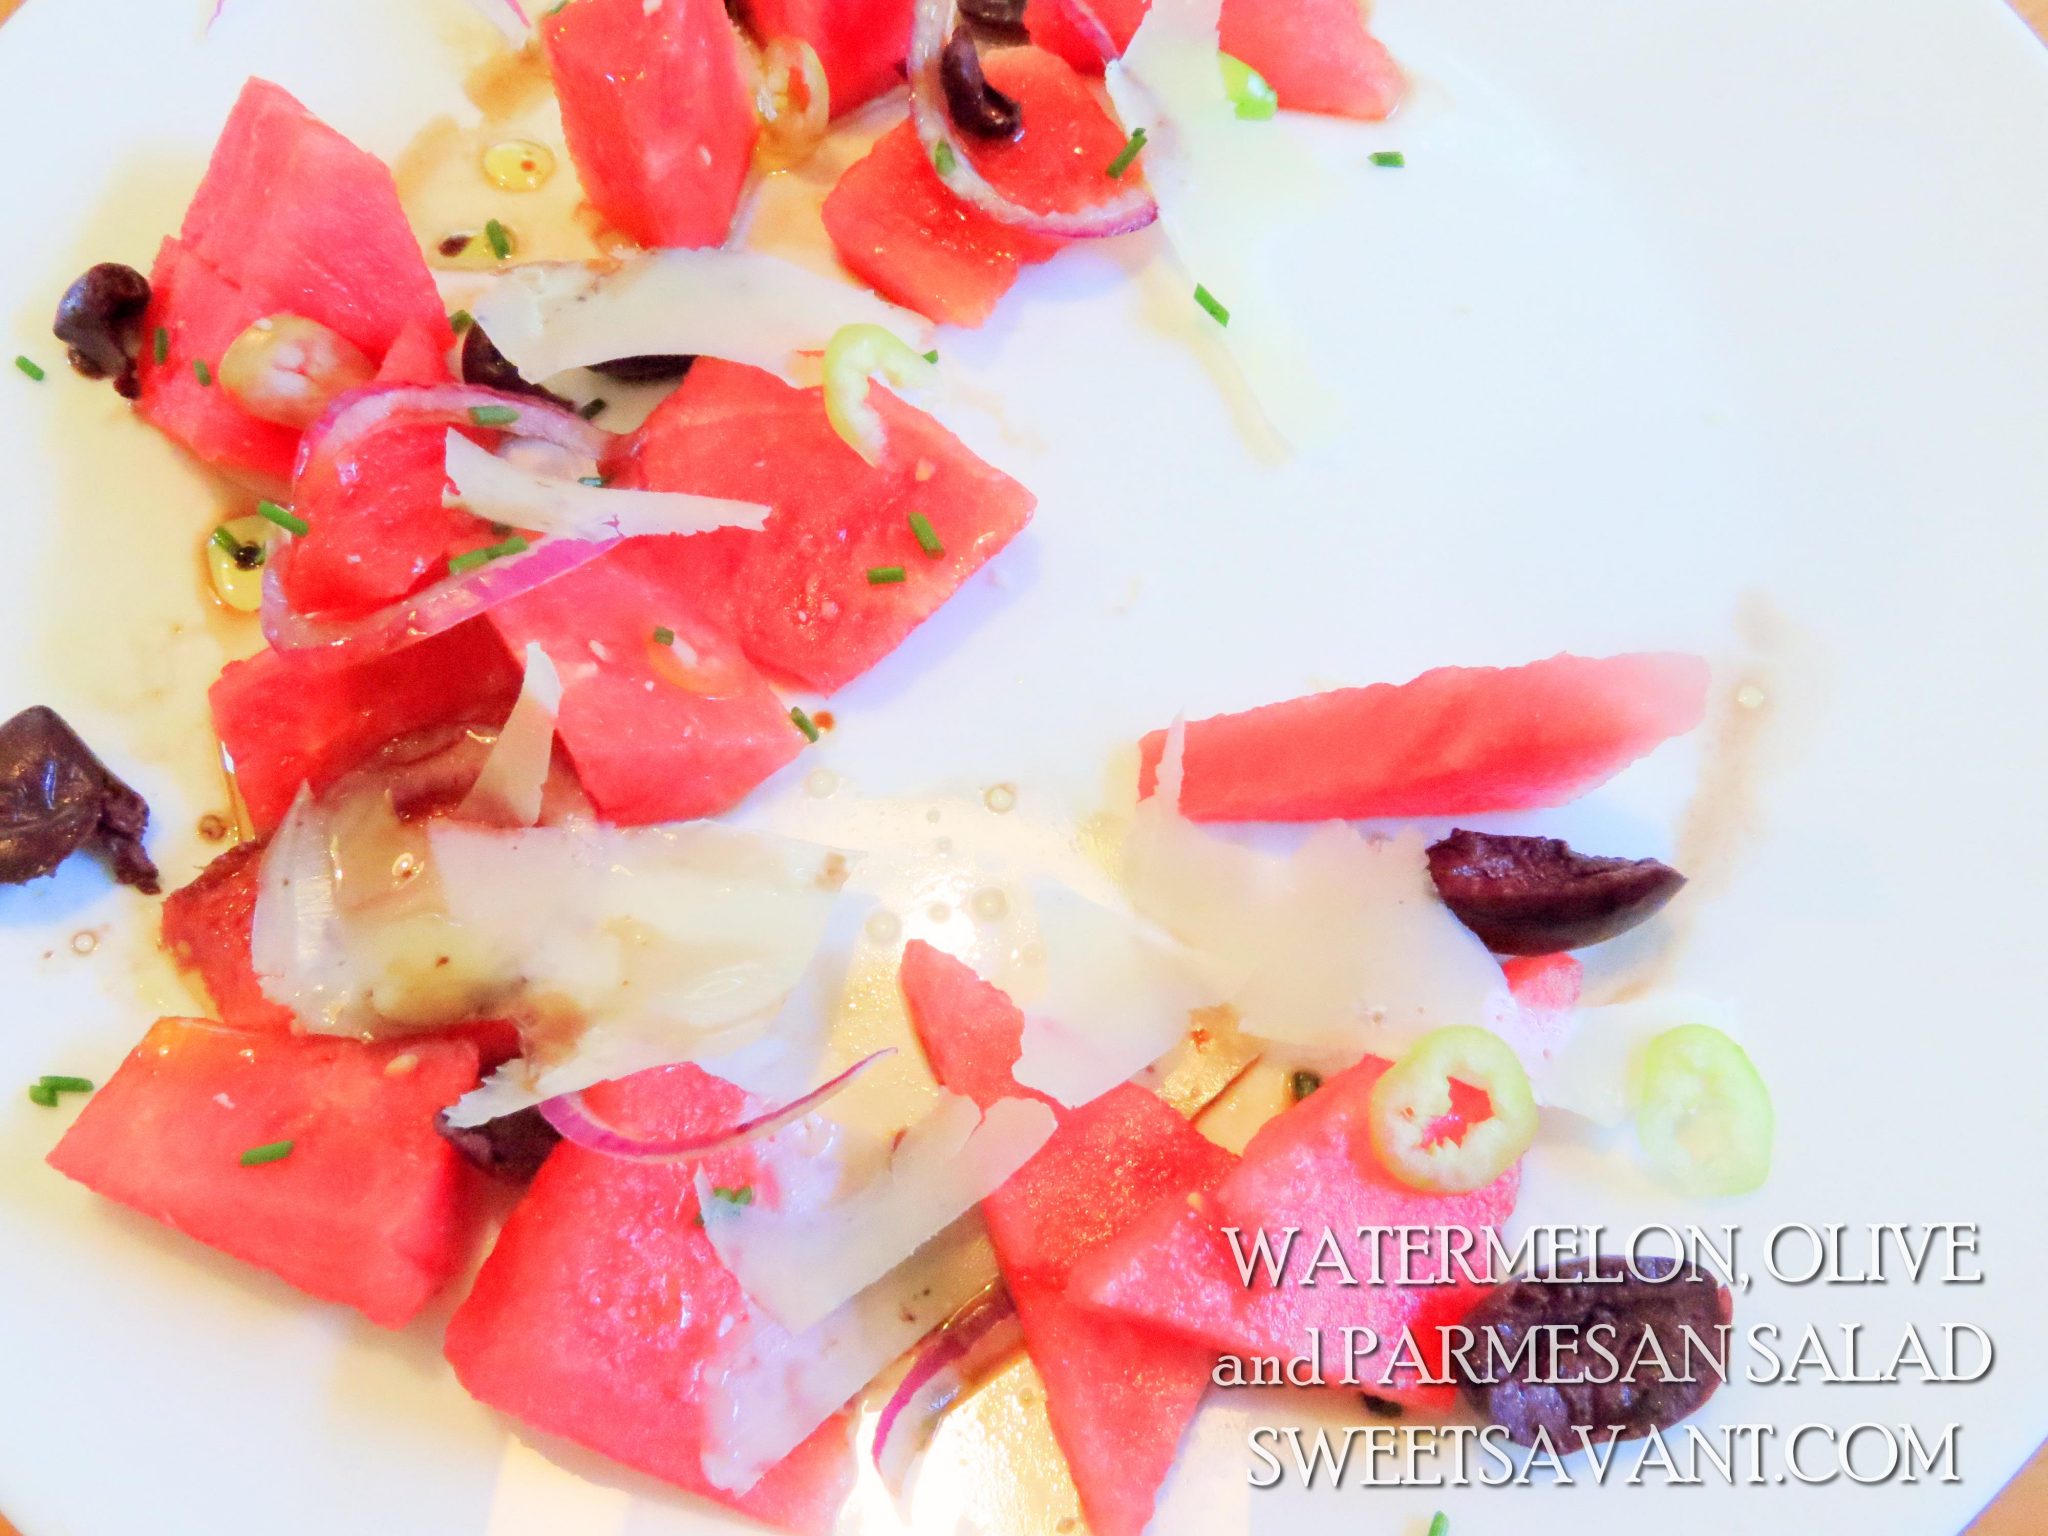 watermelon, olive and Parmesan salad by Sweet Savant your personal chef, America's best food blog, Atlanta food bogger